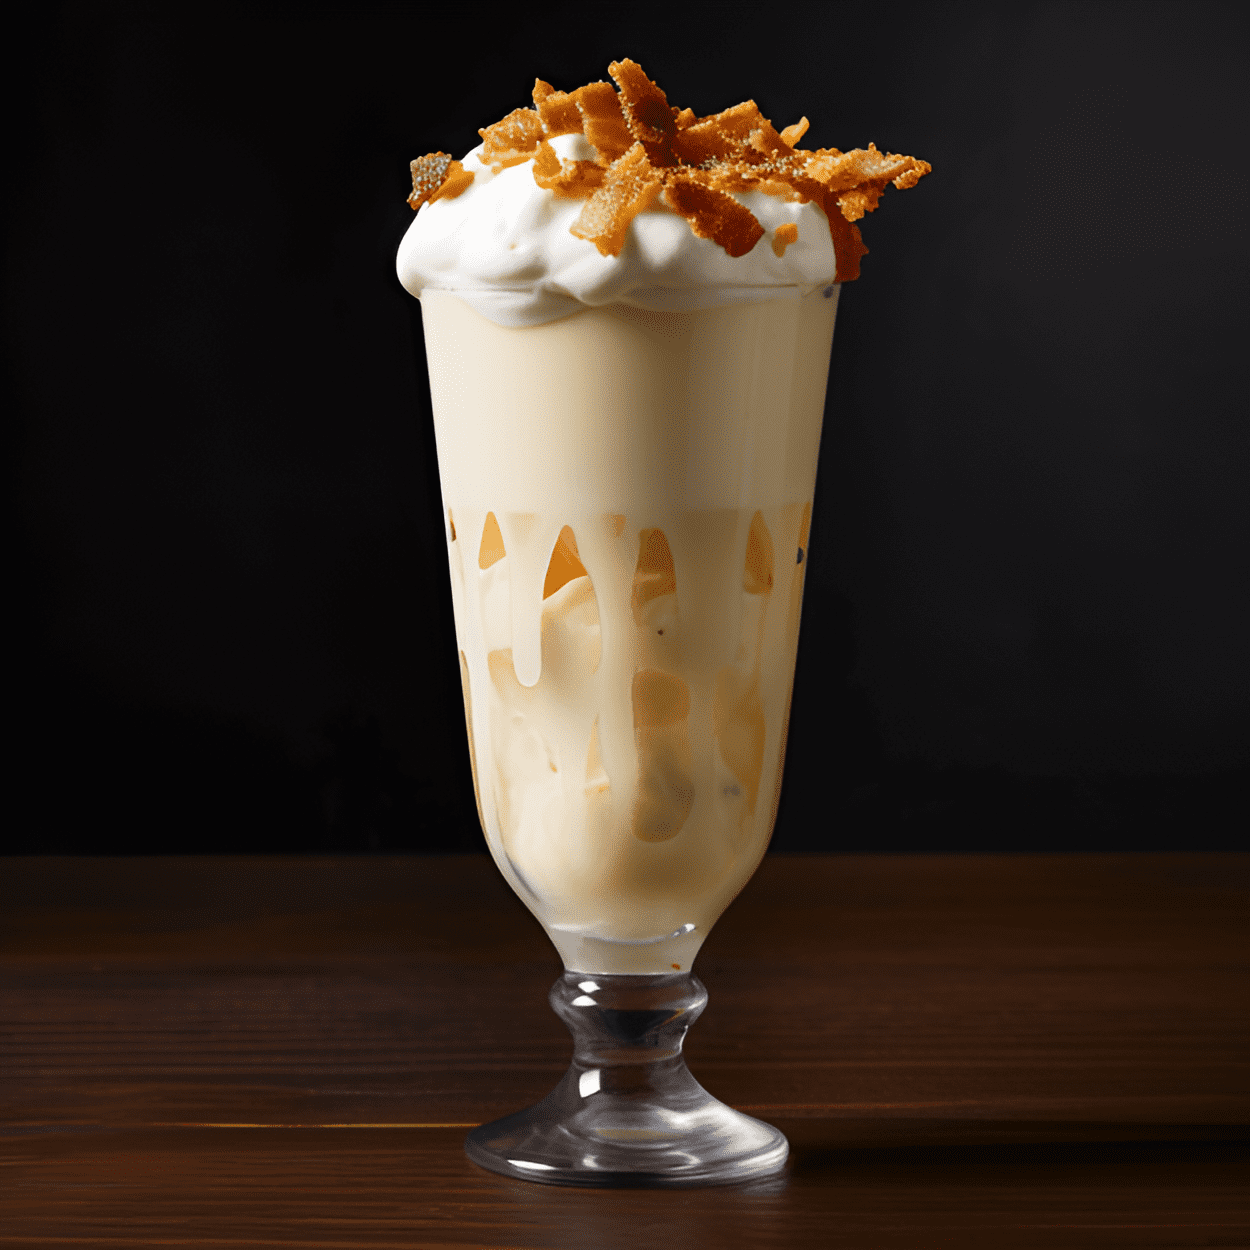 Elvis Recipe - The Elvis cocktail is a sweet, creamy, and rich drink. The banana and peanut butter flavors are prominent, with a subtle smoky hint from the bacon. It's a strong cocktail with a smooth finish.